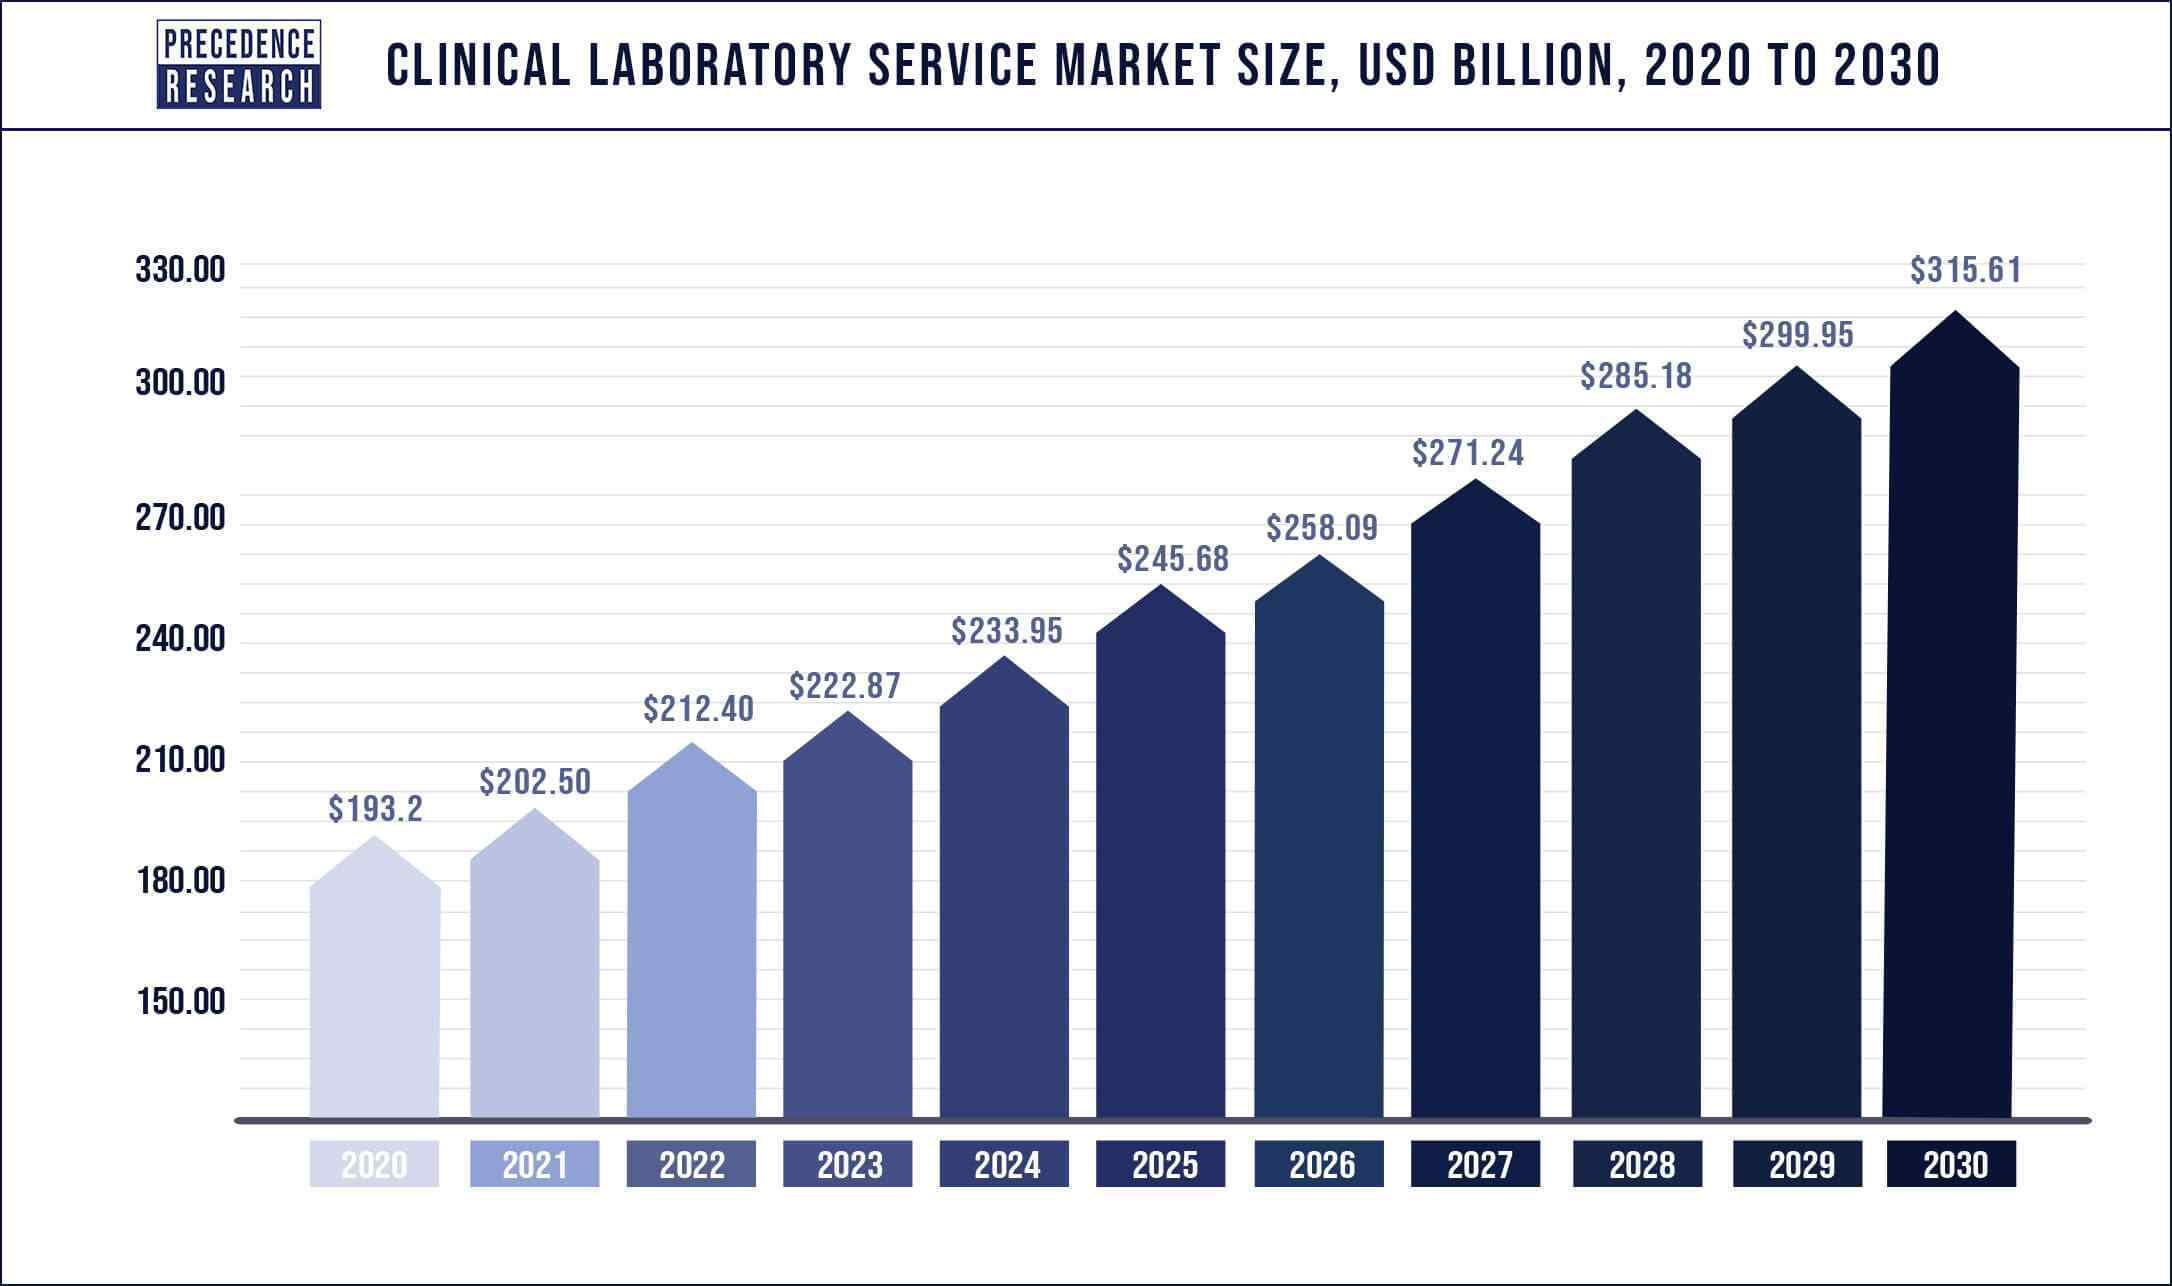 Clinical Laboratory Service Market Size 2020 to 2030